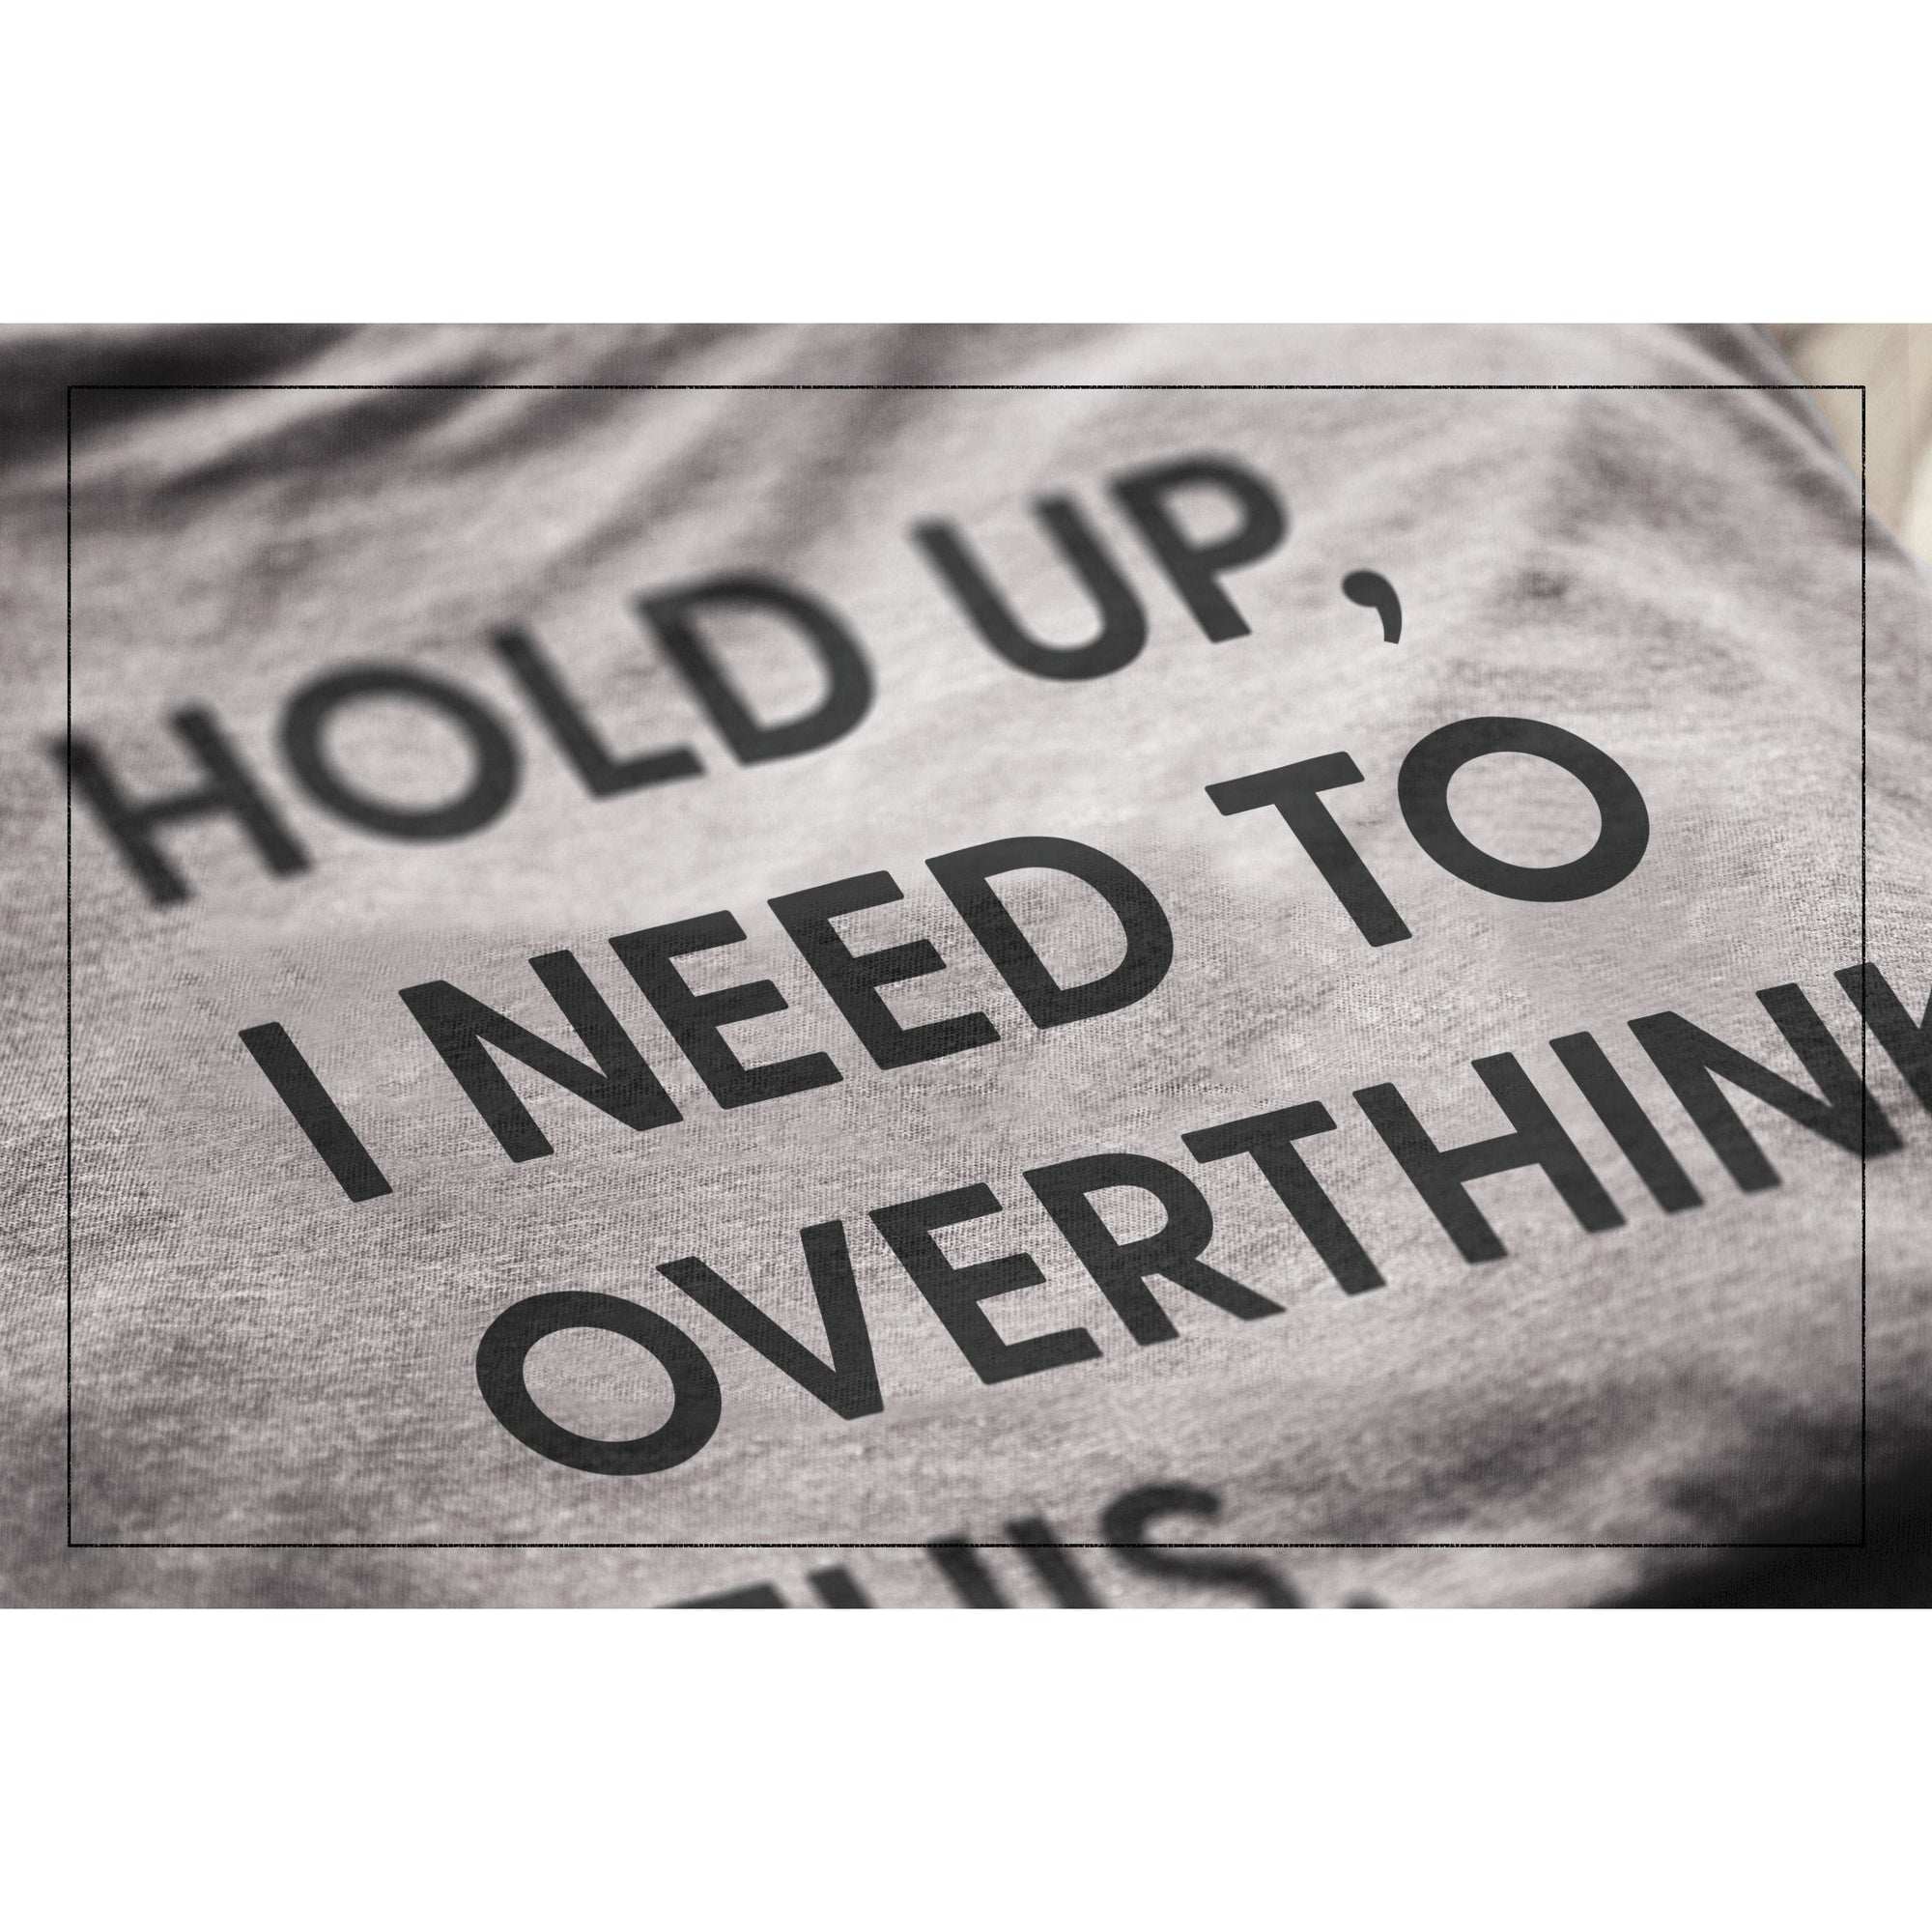 Hold Up, I Need To Rethink This Heather Grey Printed Graphic Men's Crew T-Shirt Tee Closeup Details